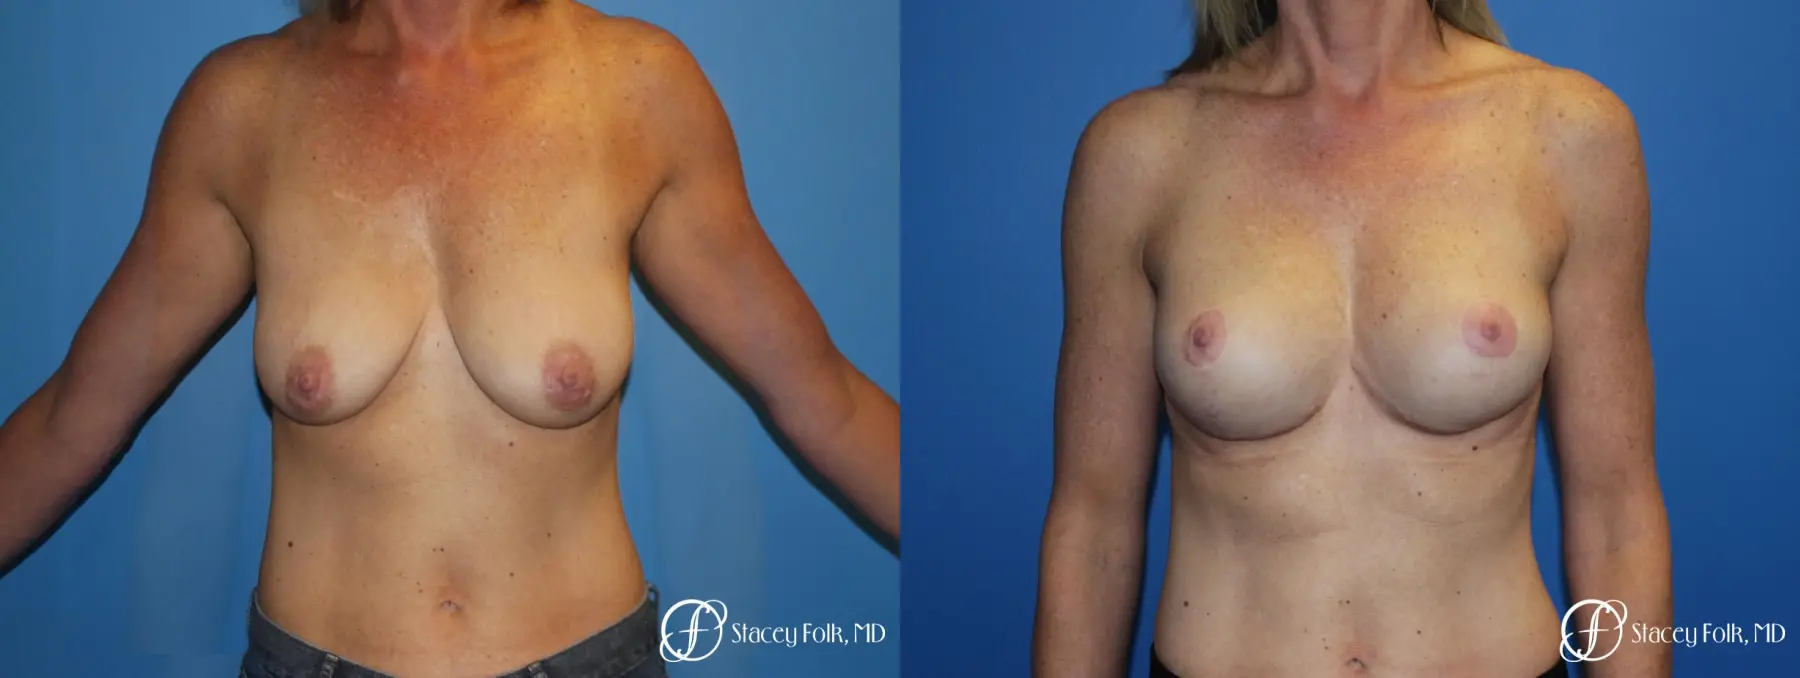 Breast Augmentation with Breast Lift (Augmentation/Mastopexy) - Before and After 1